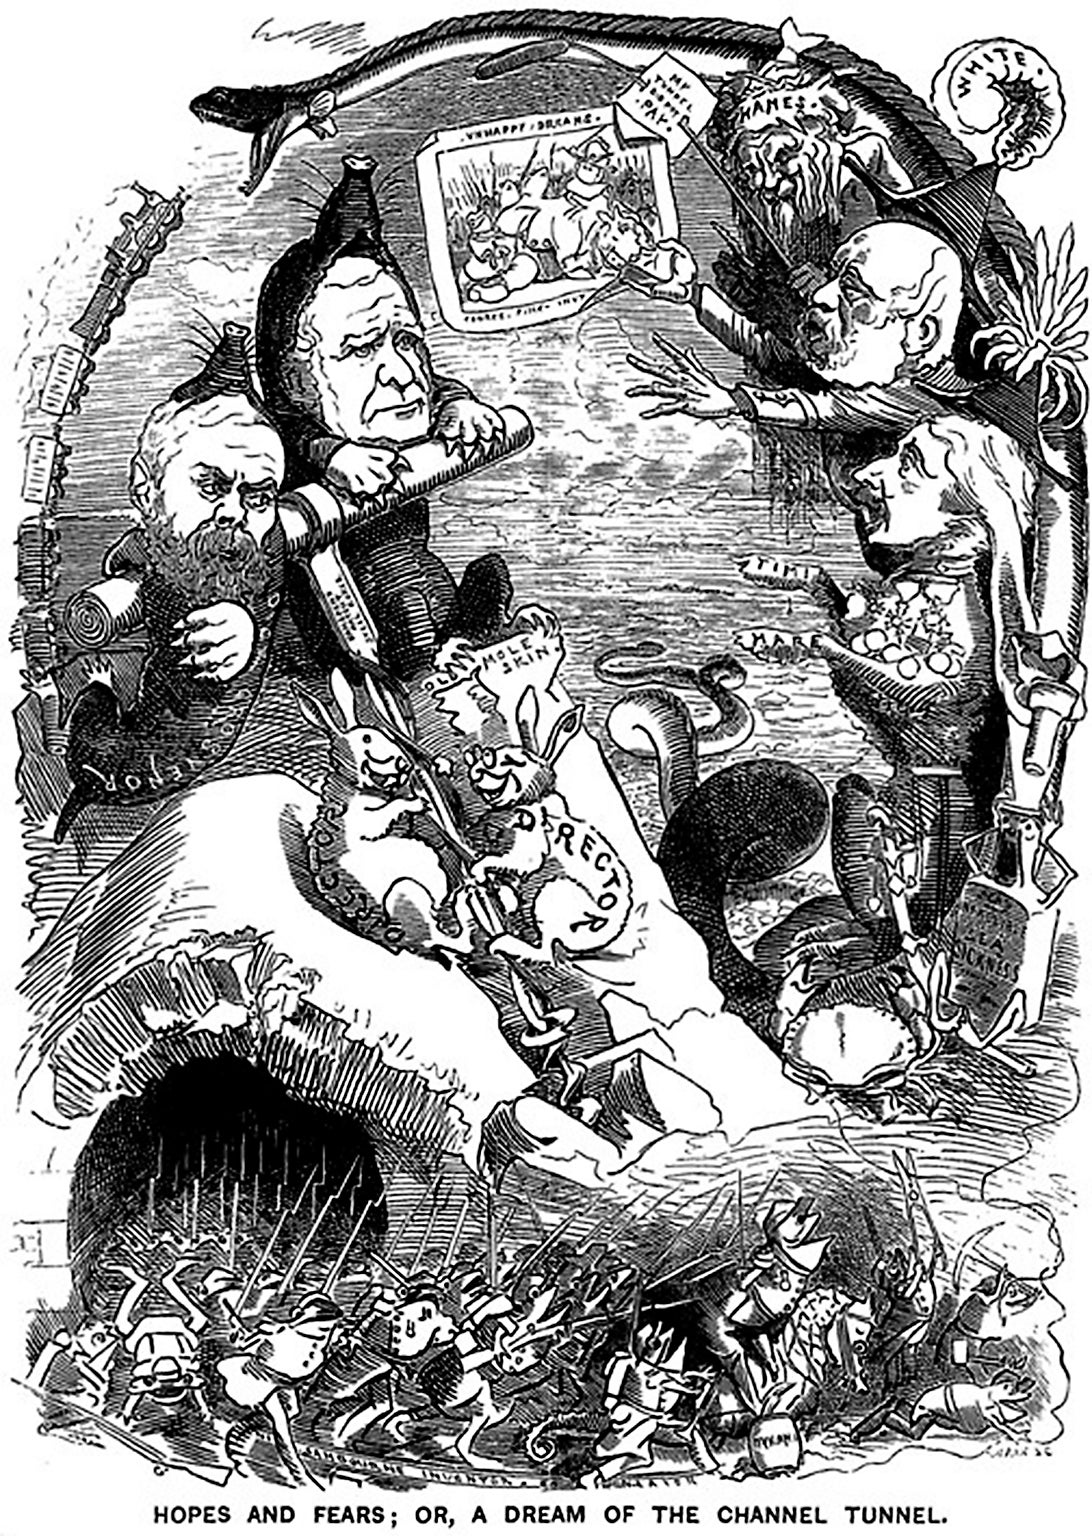 An 1882 Punch cartoon summed up Britons’ fears, depicting invasion by armour-clad frogs. Similarities in tone and aesthetics to the infamous ‘Breaking Point’ poster 134 years later are (probably) coincidental